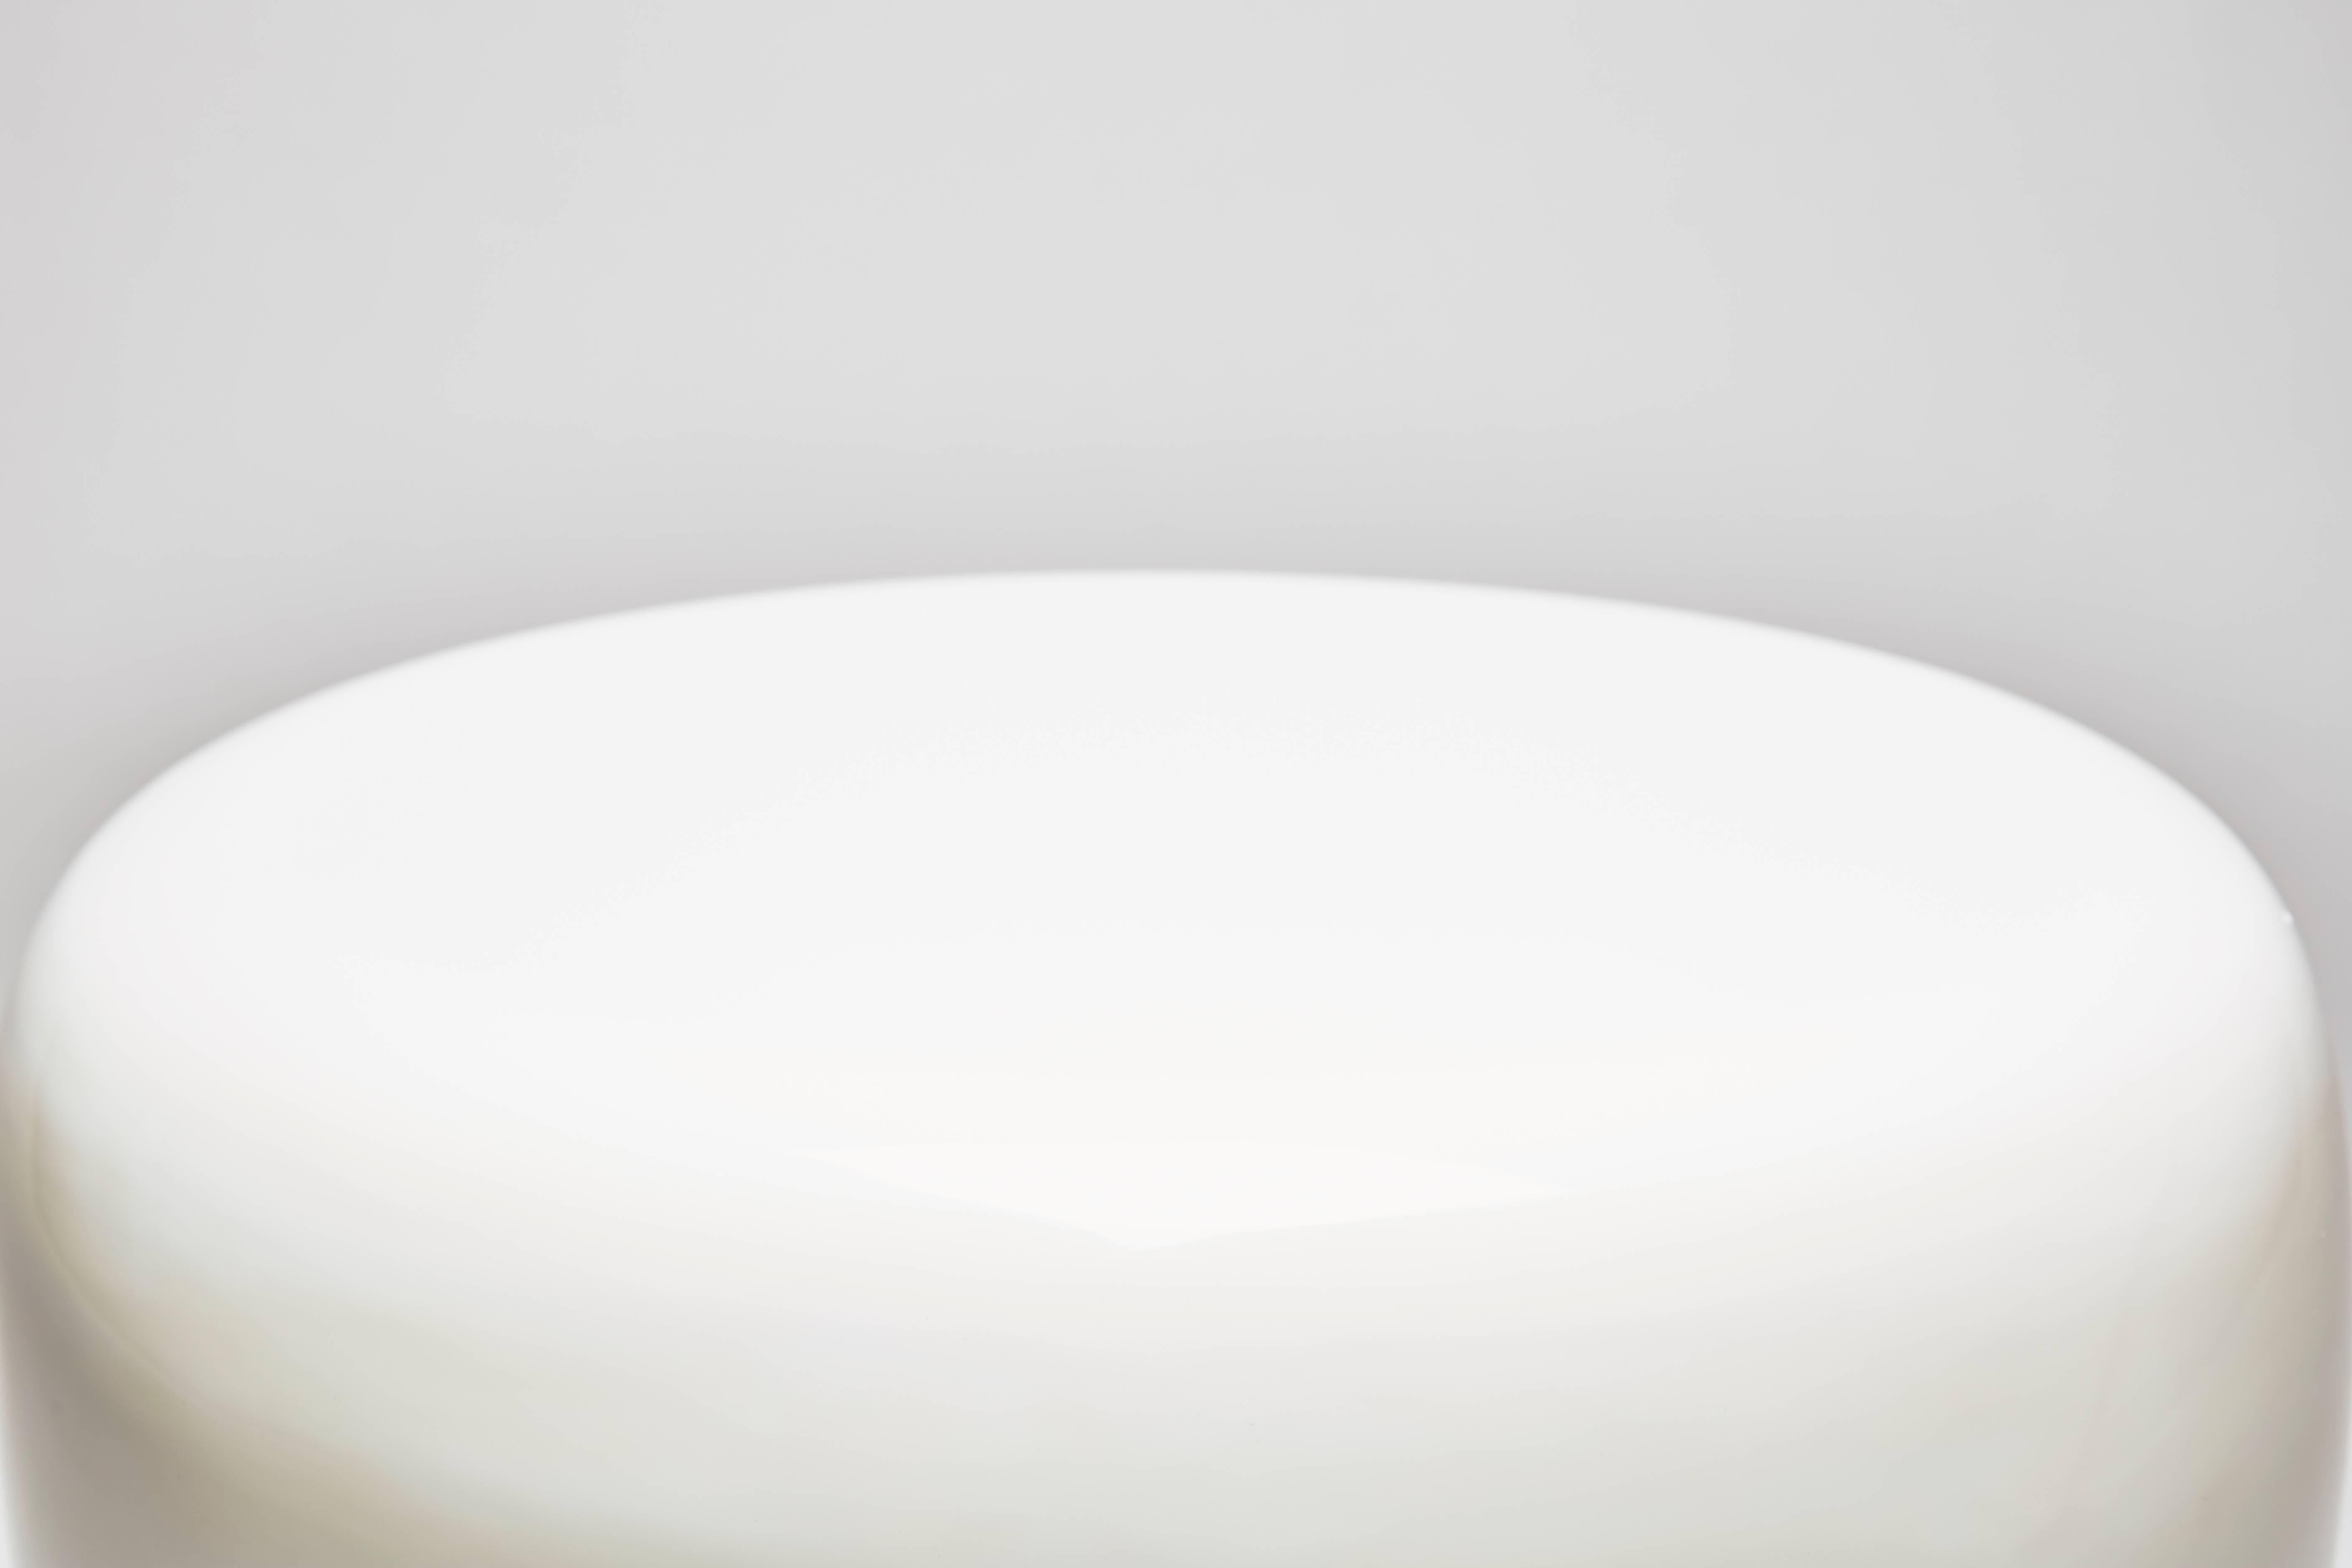 Minimalist Side Table, Milky White DOT by Reda Amalou Design, 2016 - Glossy or matt lacquer For Sale